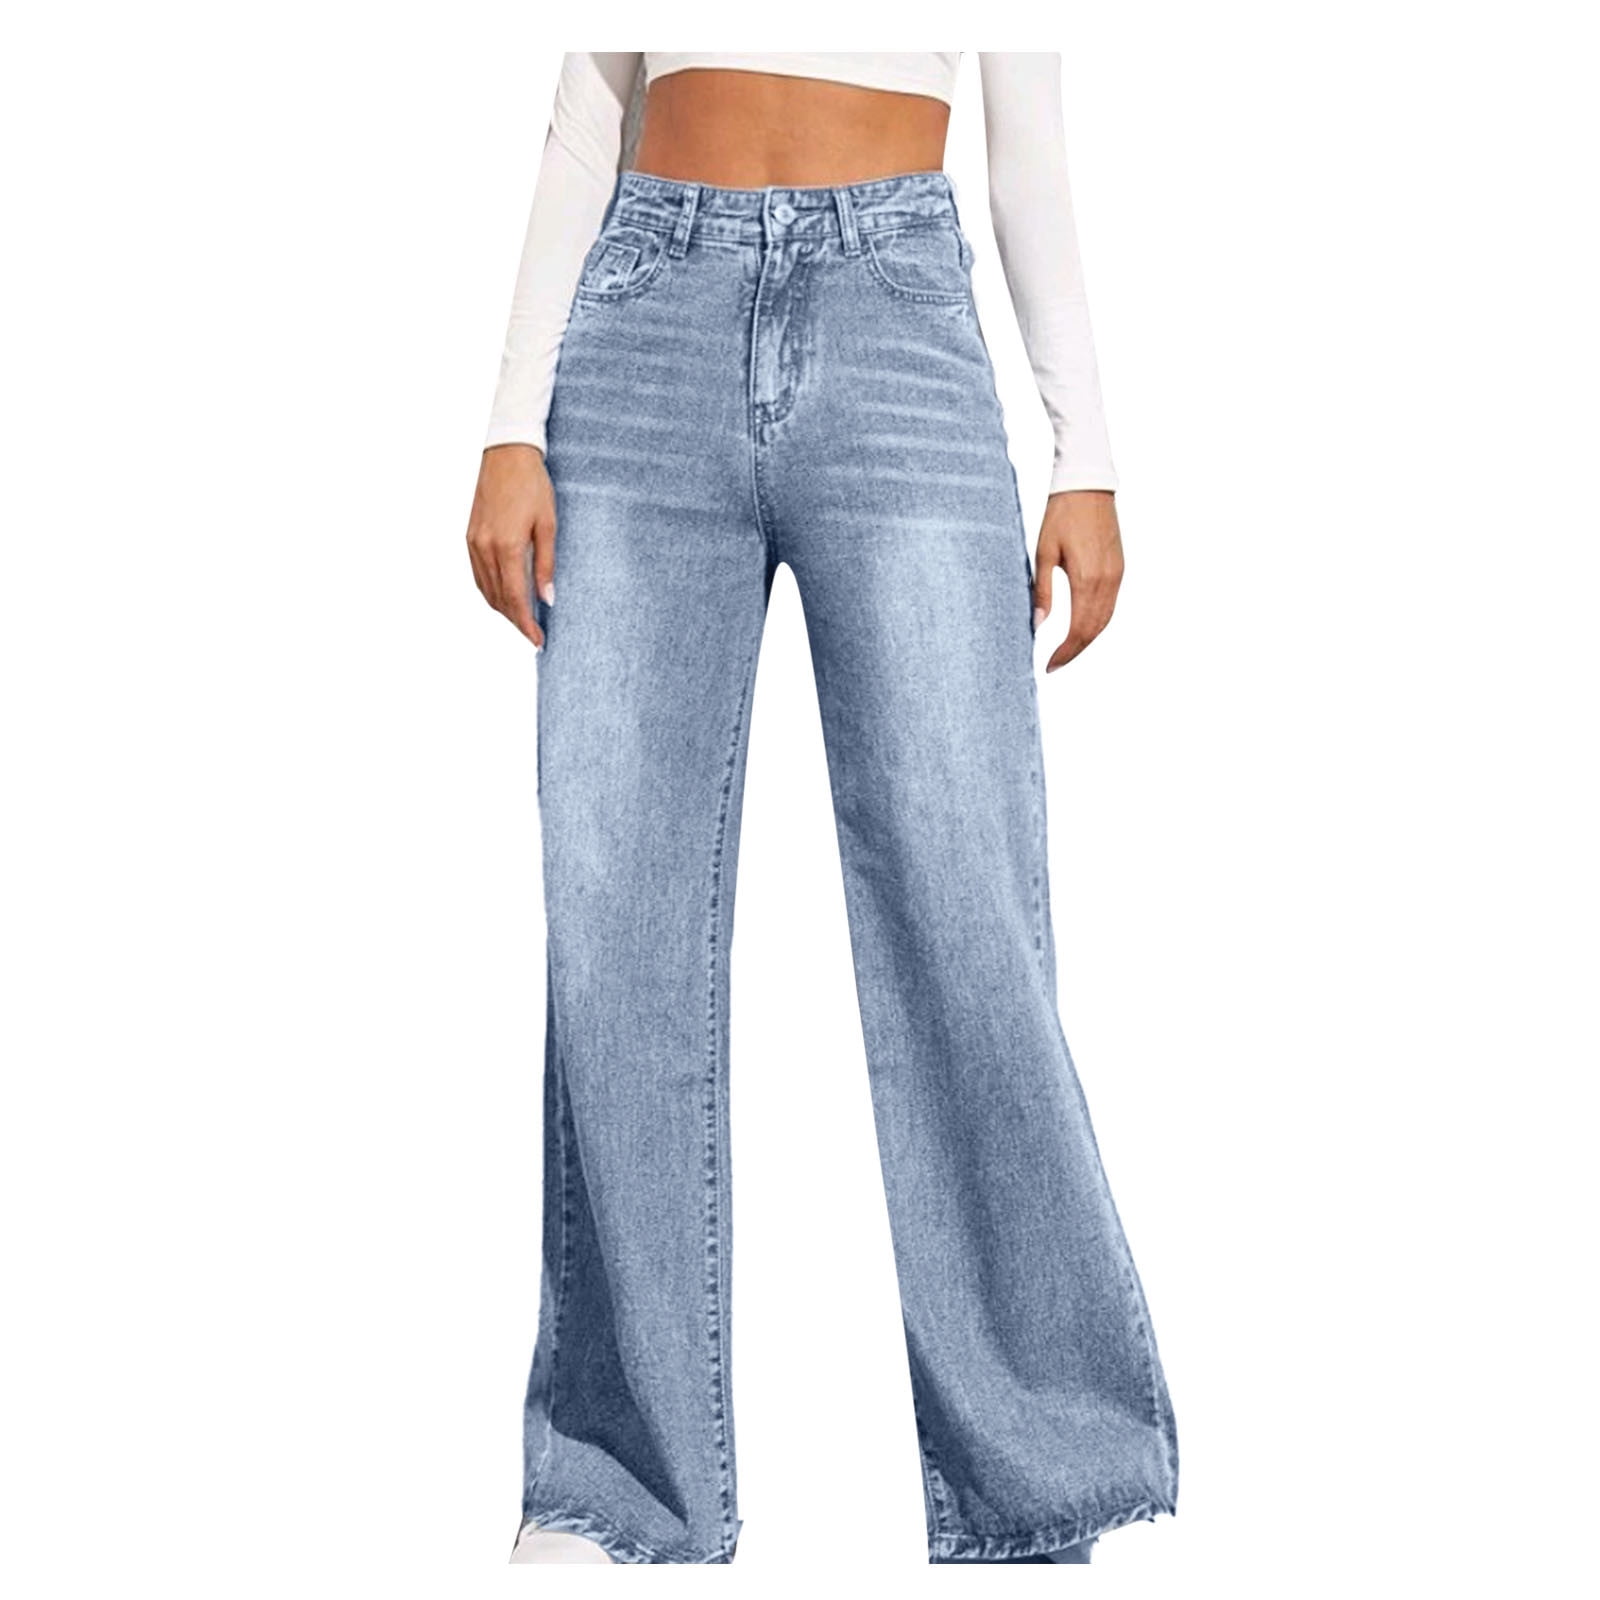 fvwitlyh Newjeans Album Women High Waisted Baggy Jeans Vintage Wide ...